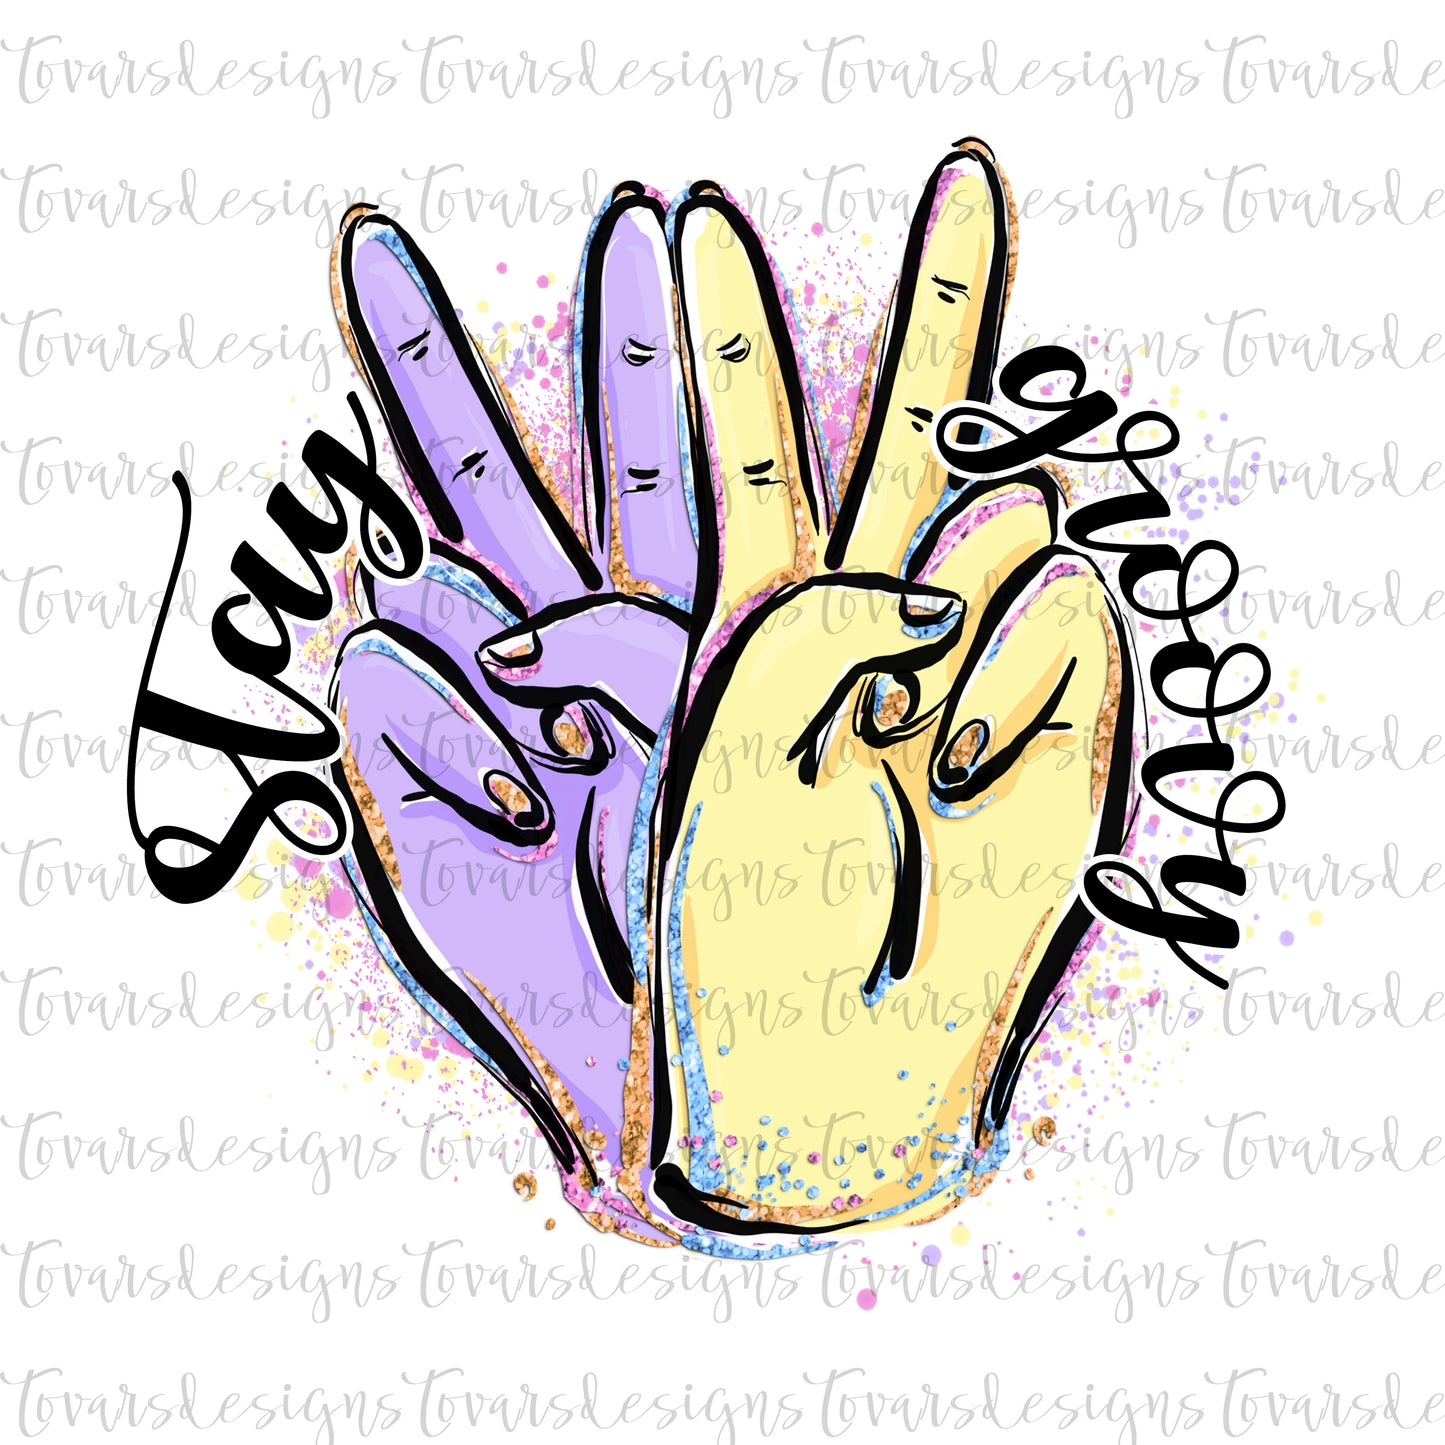 Stay Groovy, Sublimation design, Stay groovy peace sign, peace sign sublimation, peace sign png file, stay groovy design, peace design